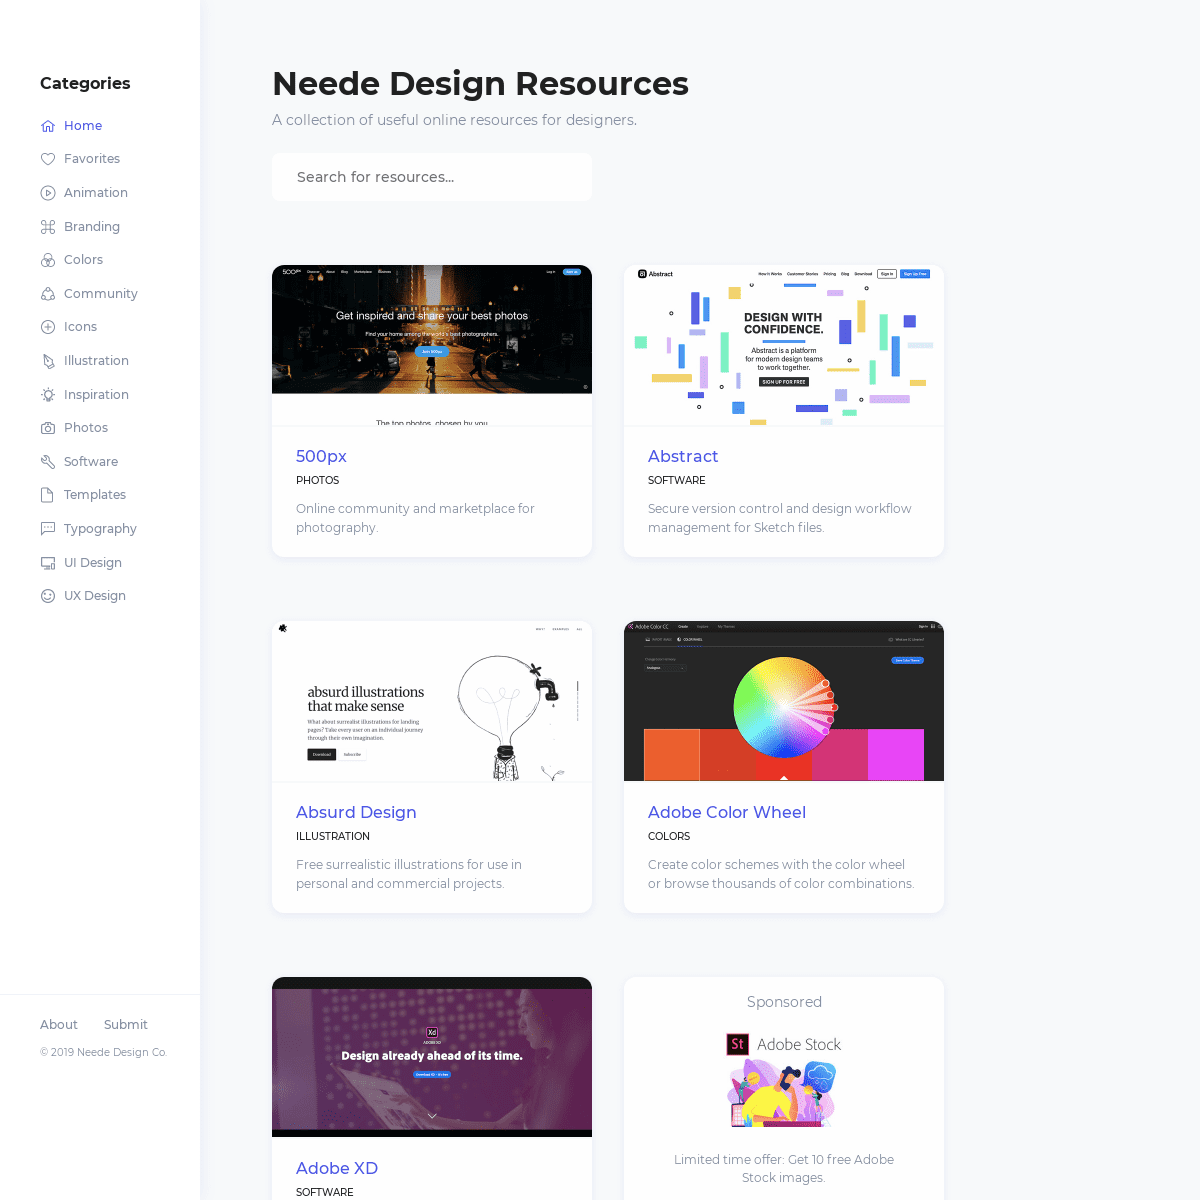 A complete backup of neede.co